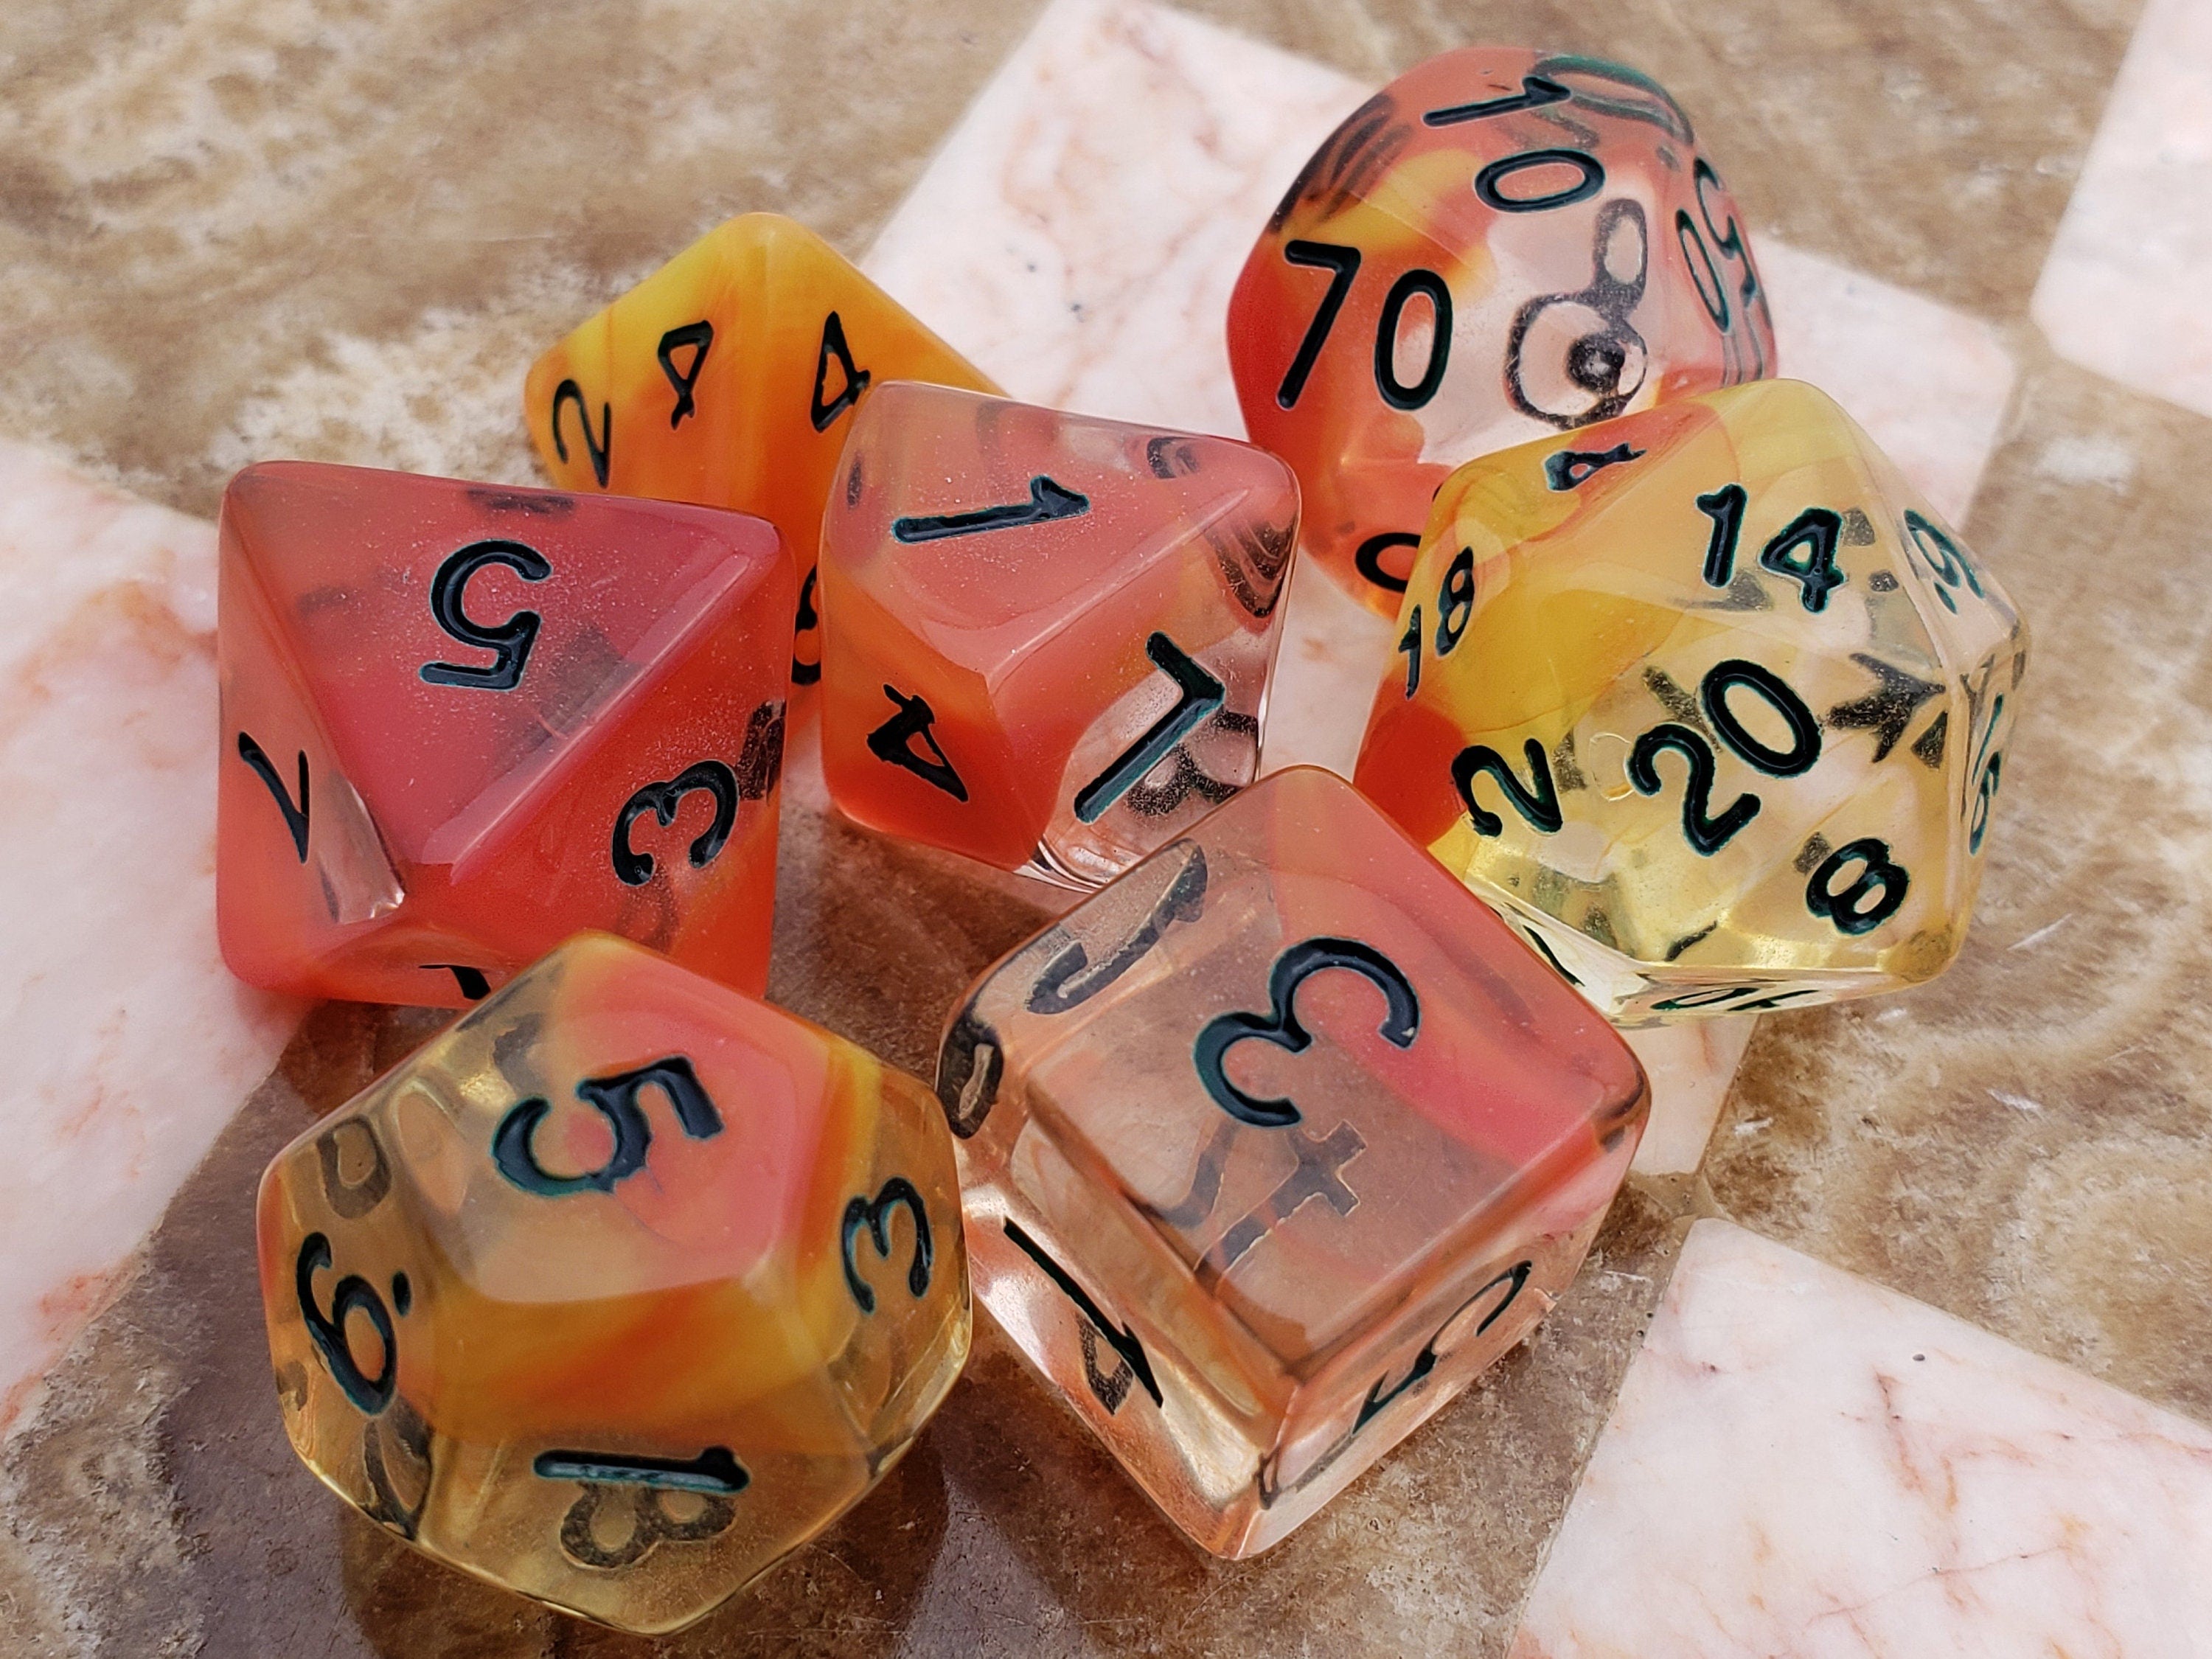 Mystery Set of Polyhedral Dice! RPG Dice | Polyhedral Dice Set | Dungeons & Dragons | DnD Dice | Random Dice